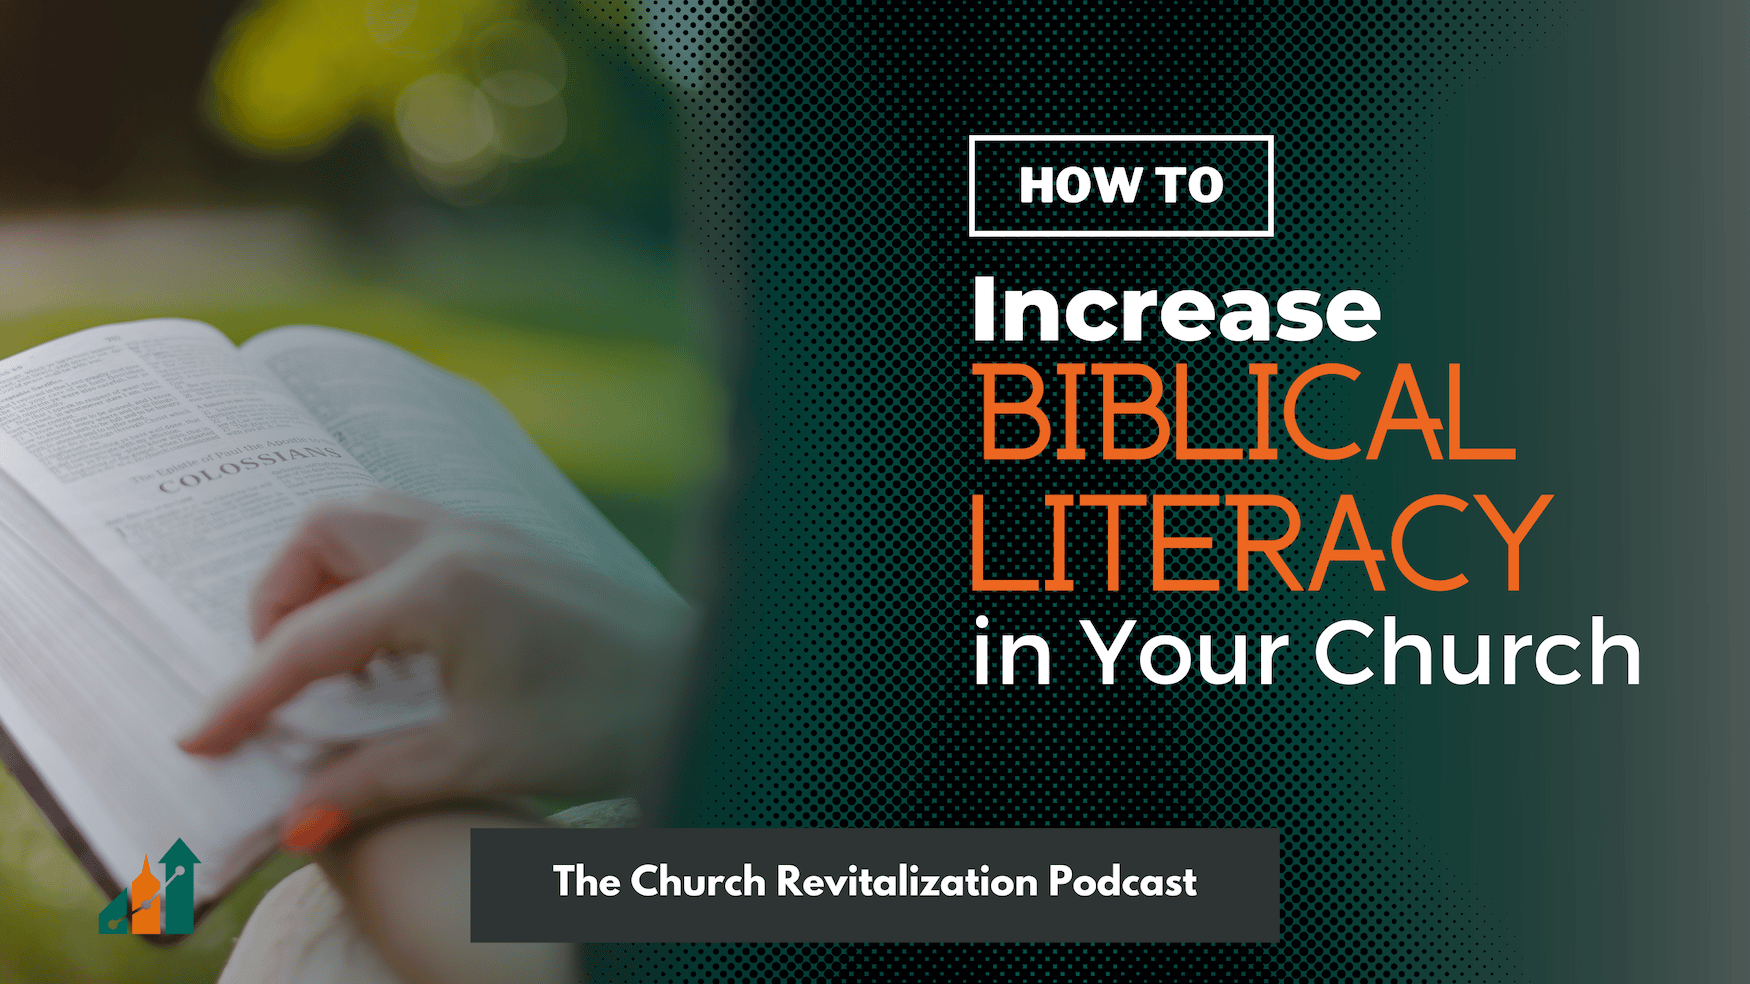 How to increase biblical literacy in your church